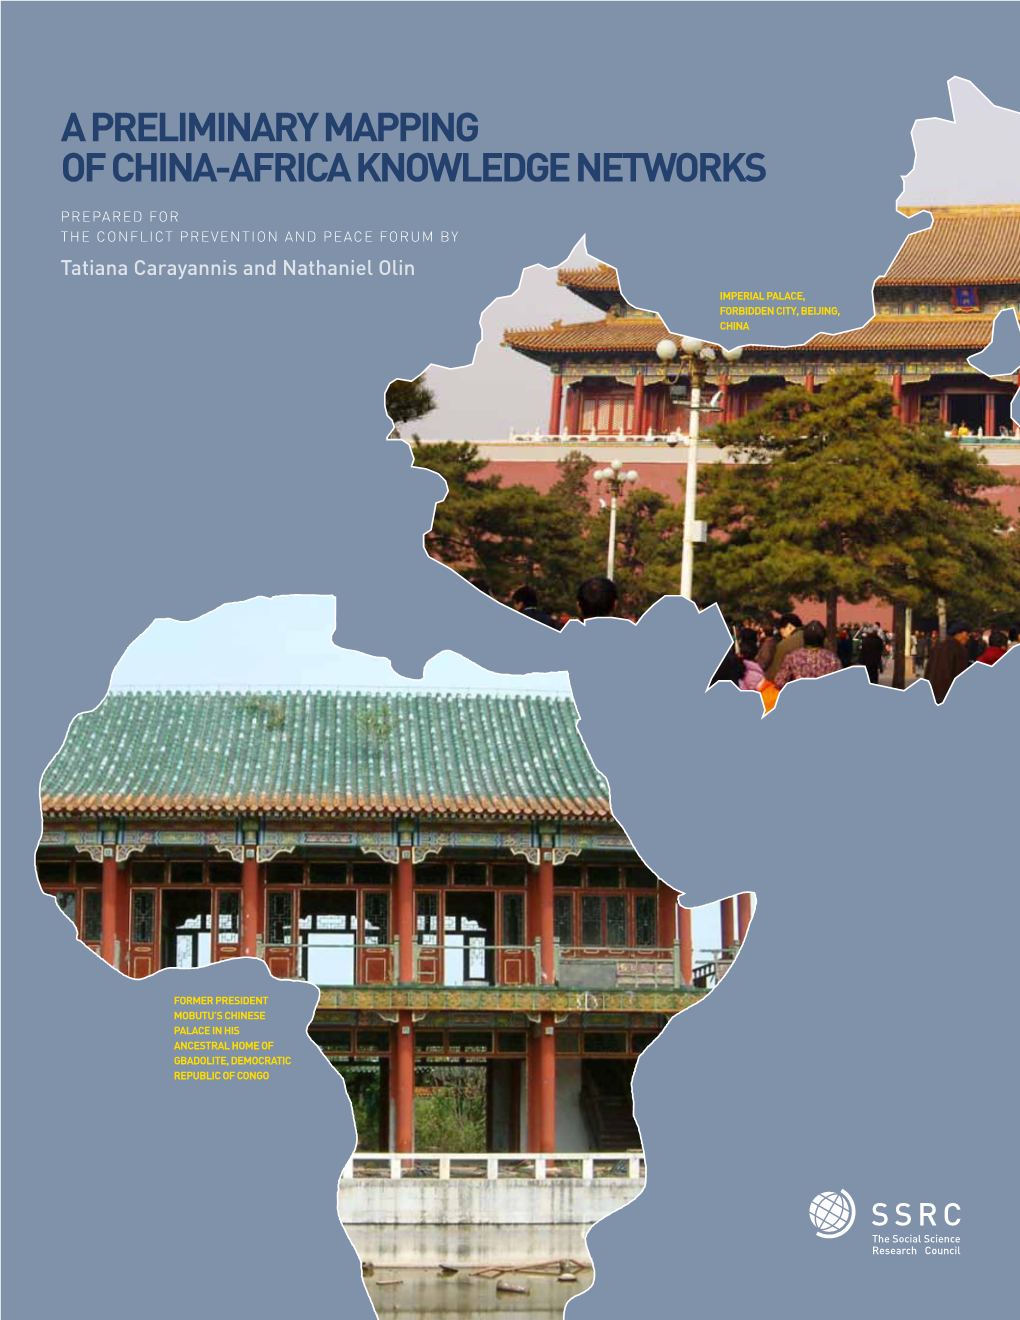 A Preliminary Mapping of China-Africa Knowledge Networks